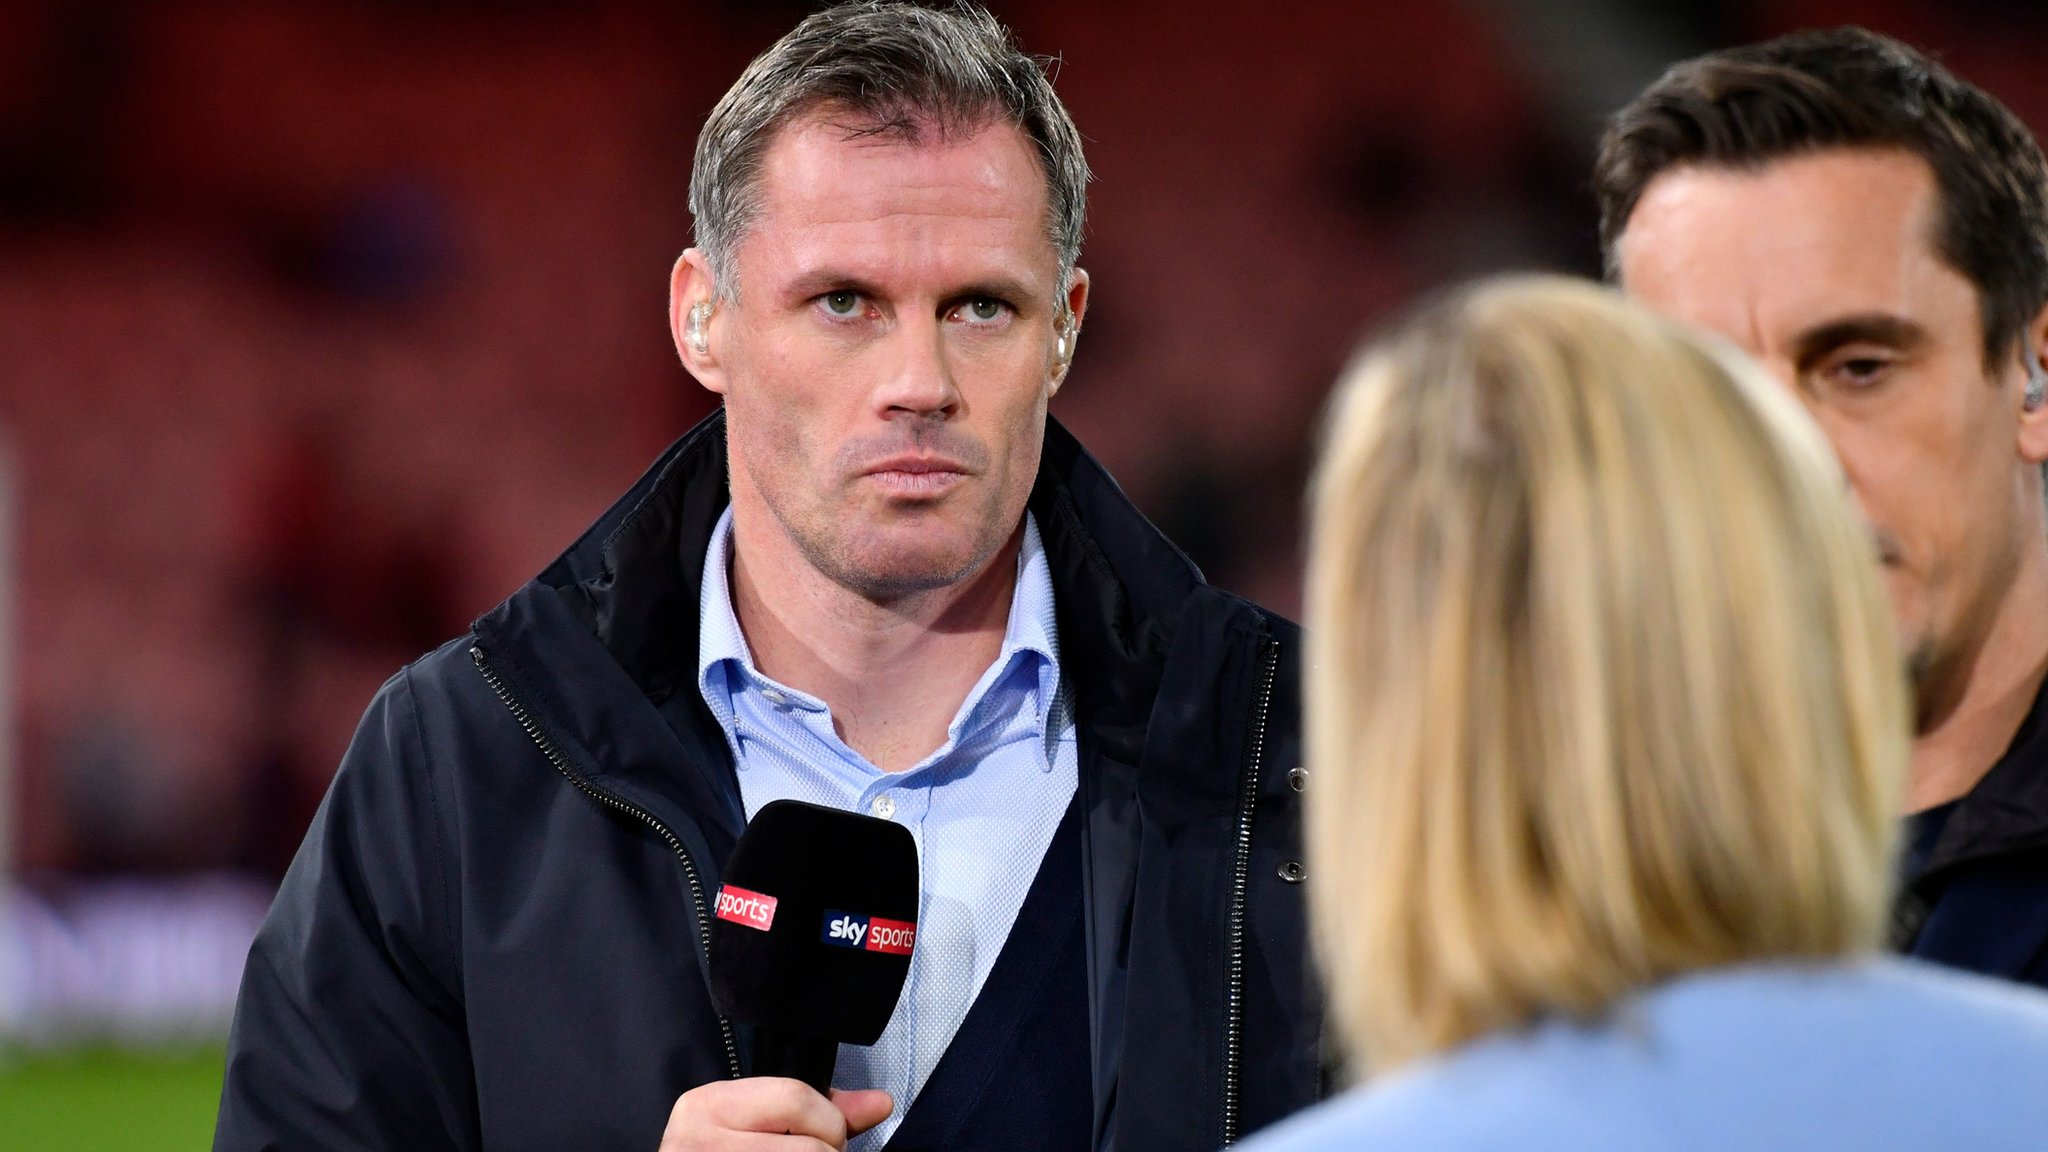 Carragher apologises to family after spitting incident